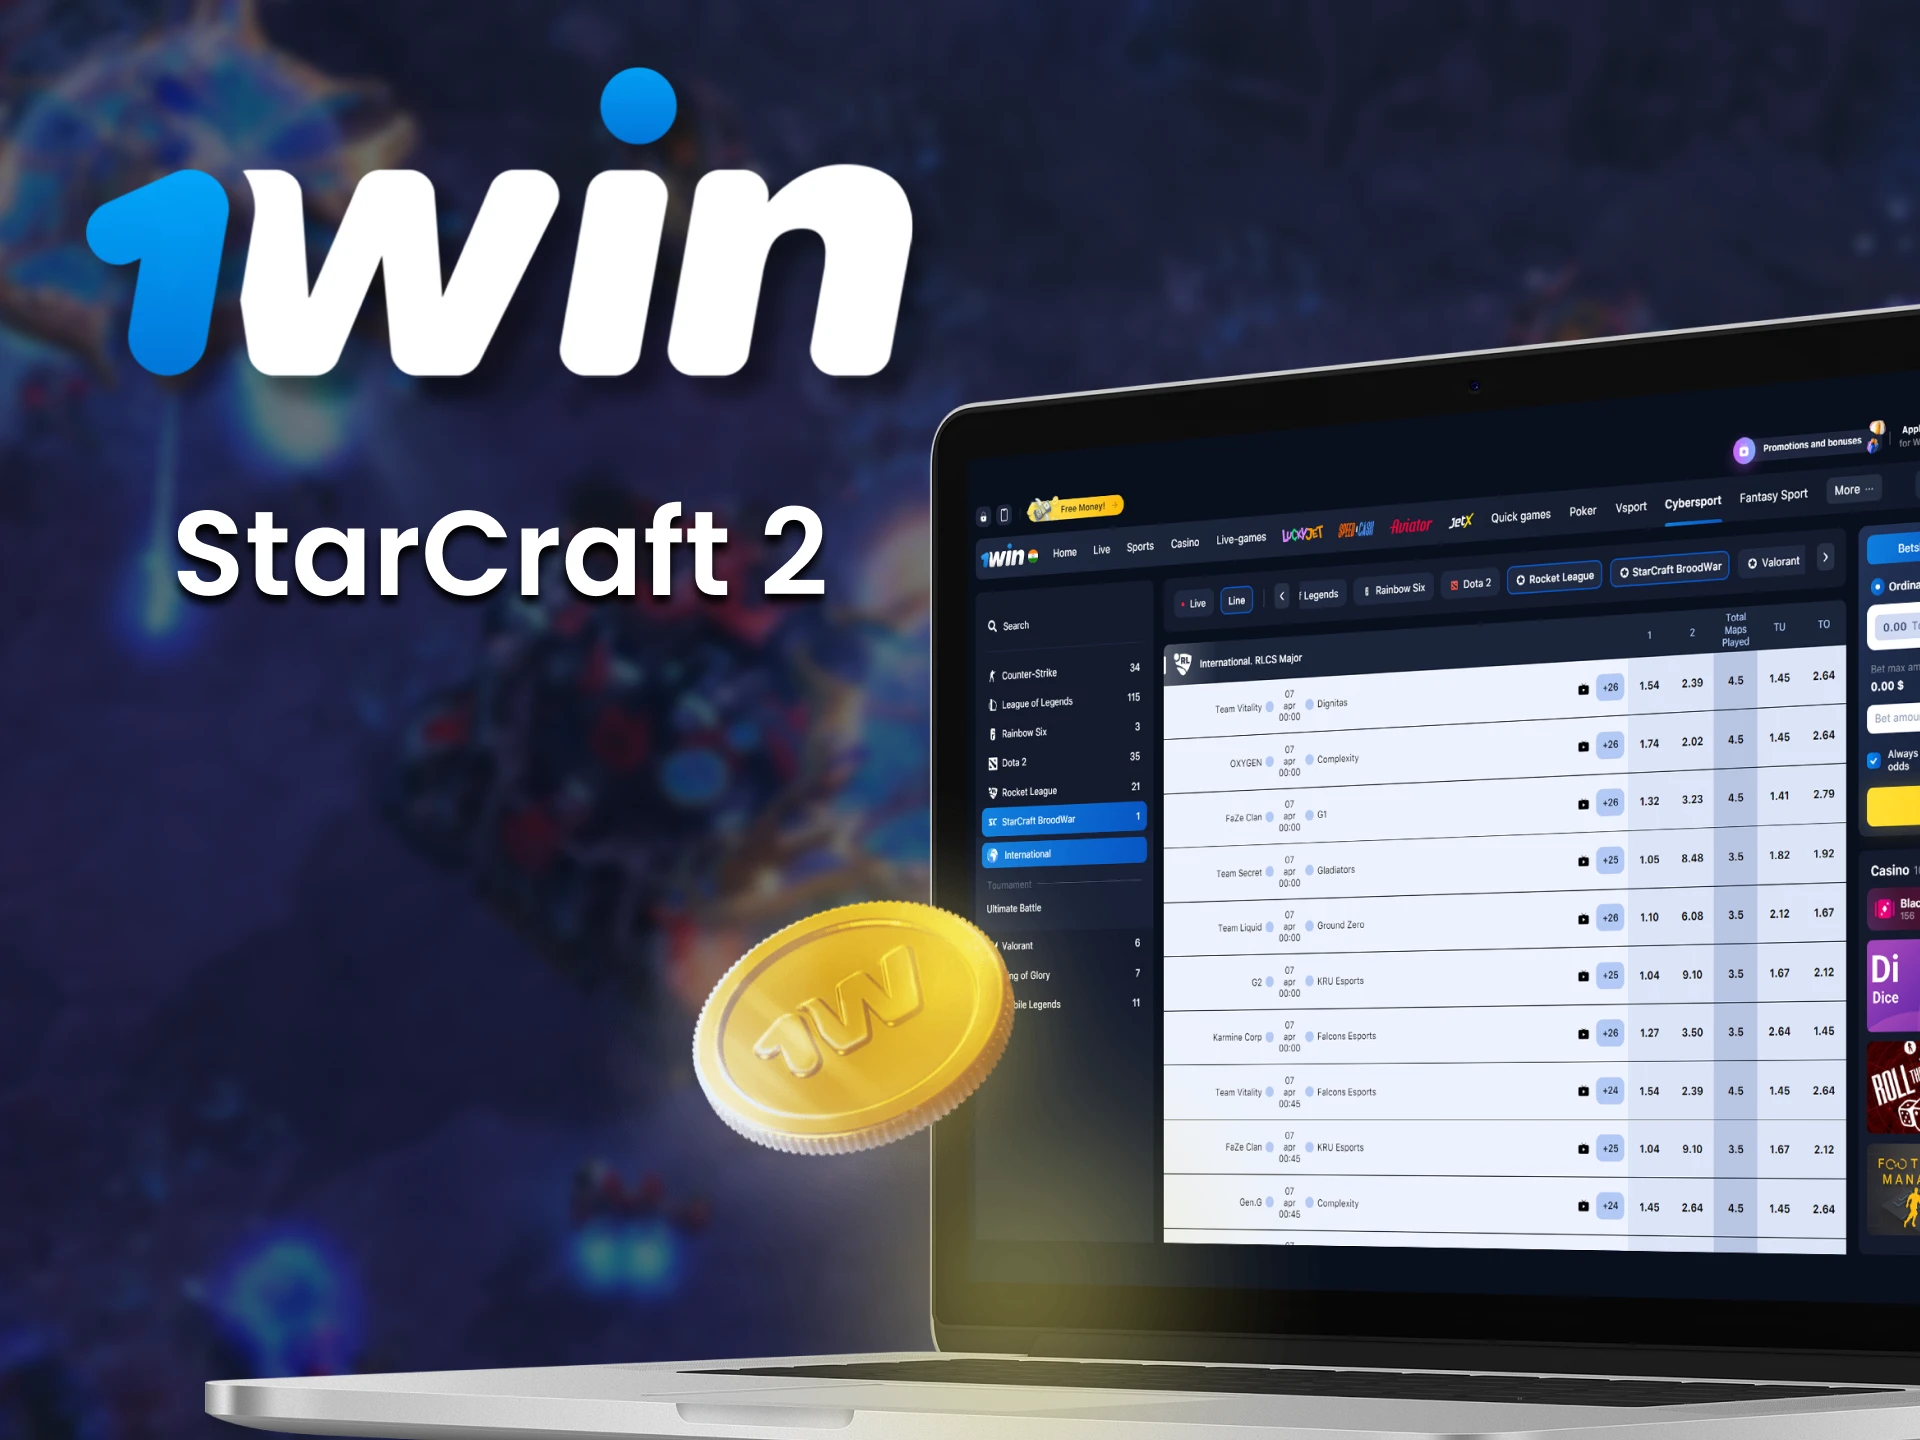 At 1win, place your bet on Starcraft 2.